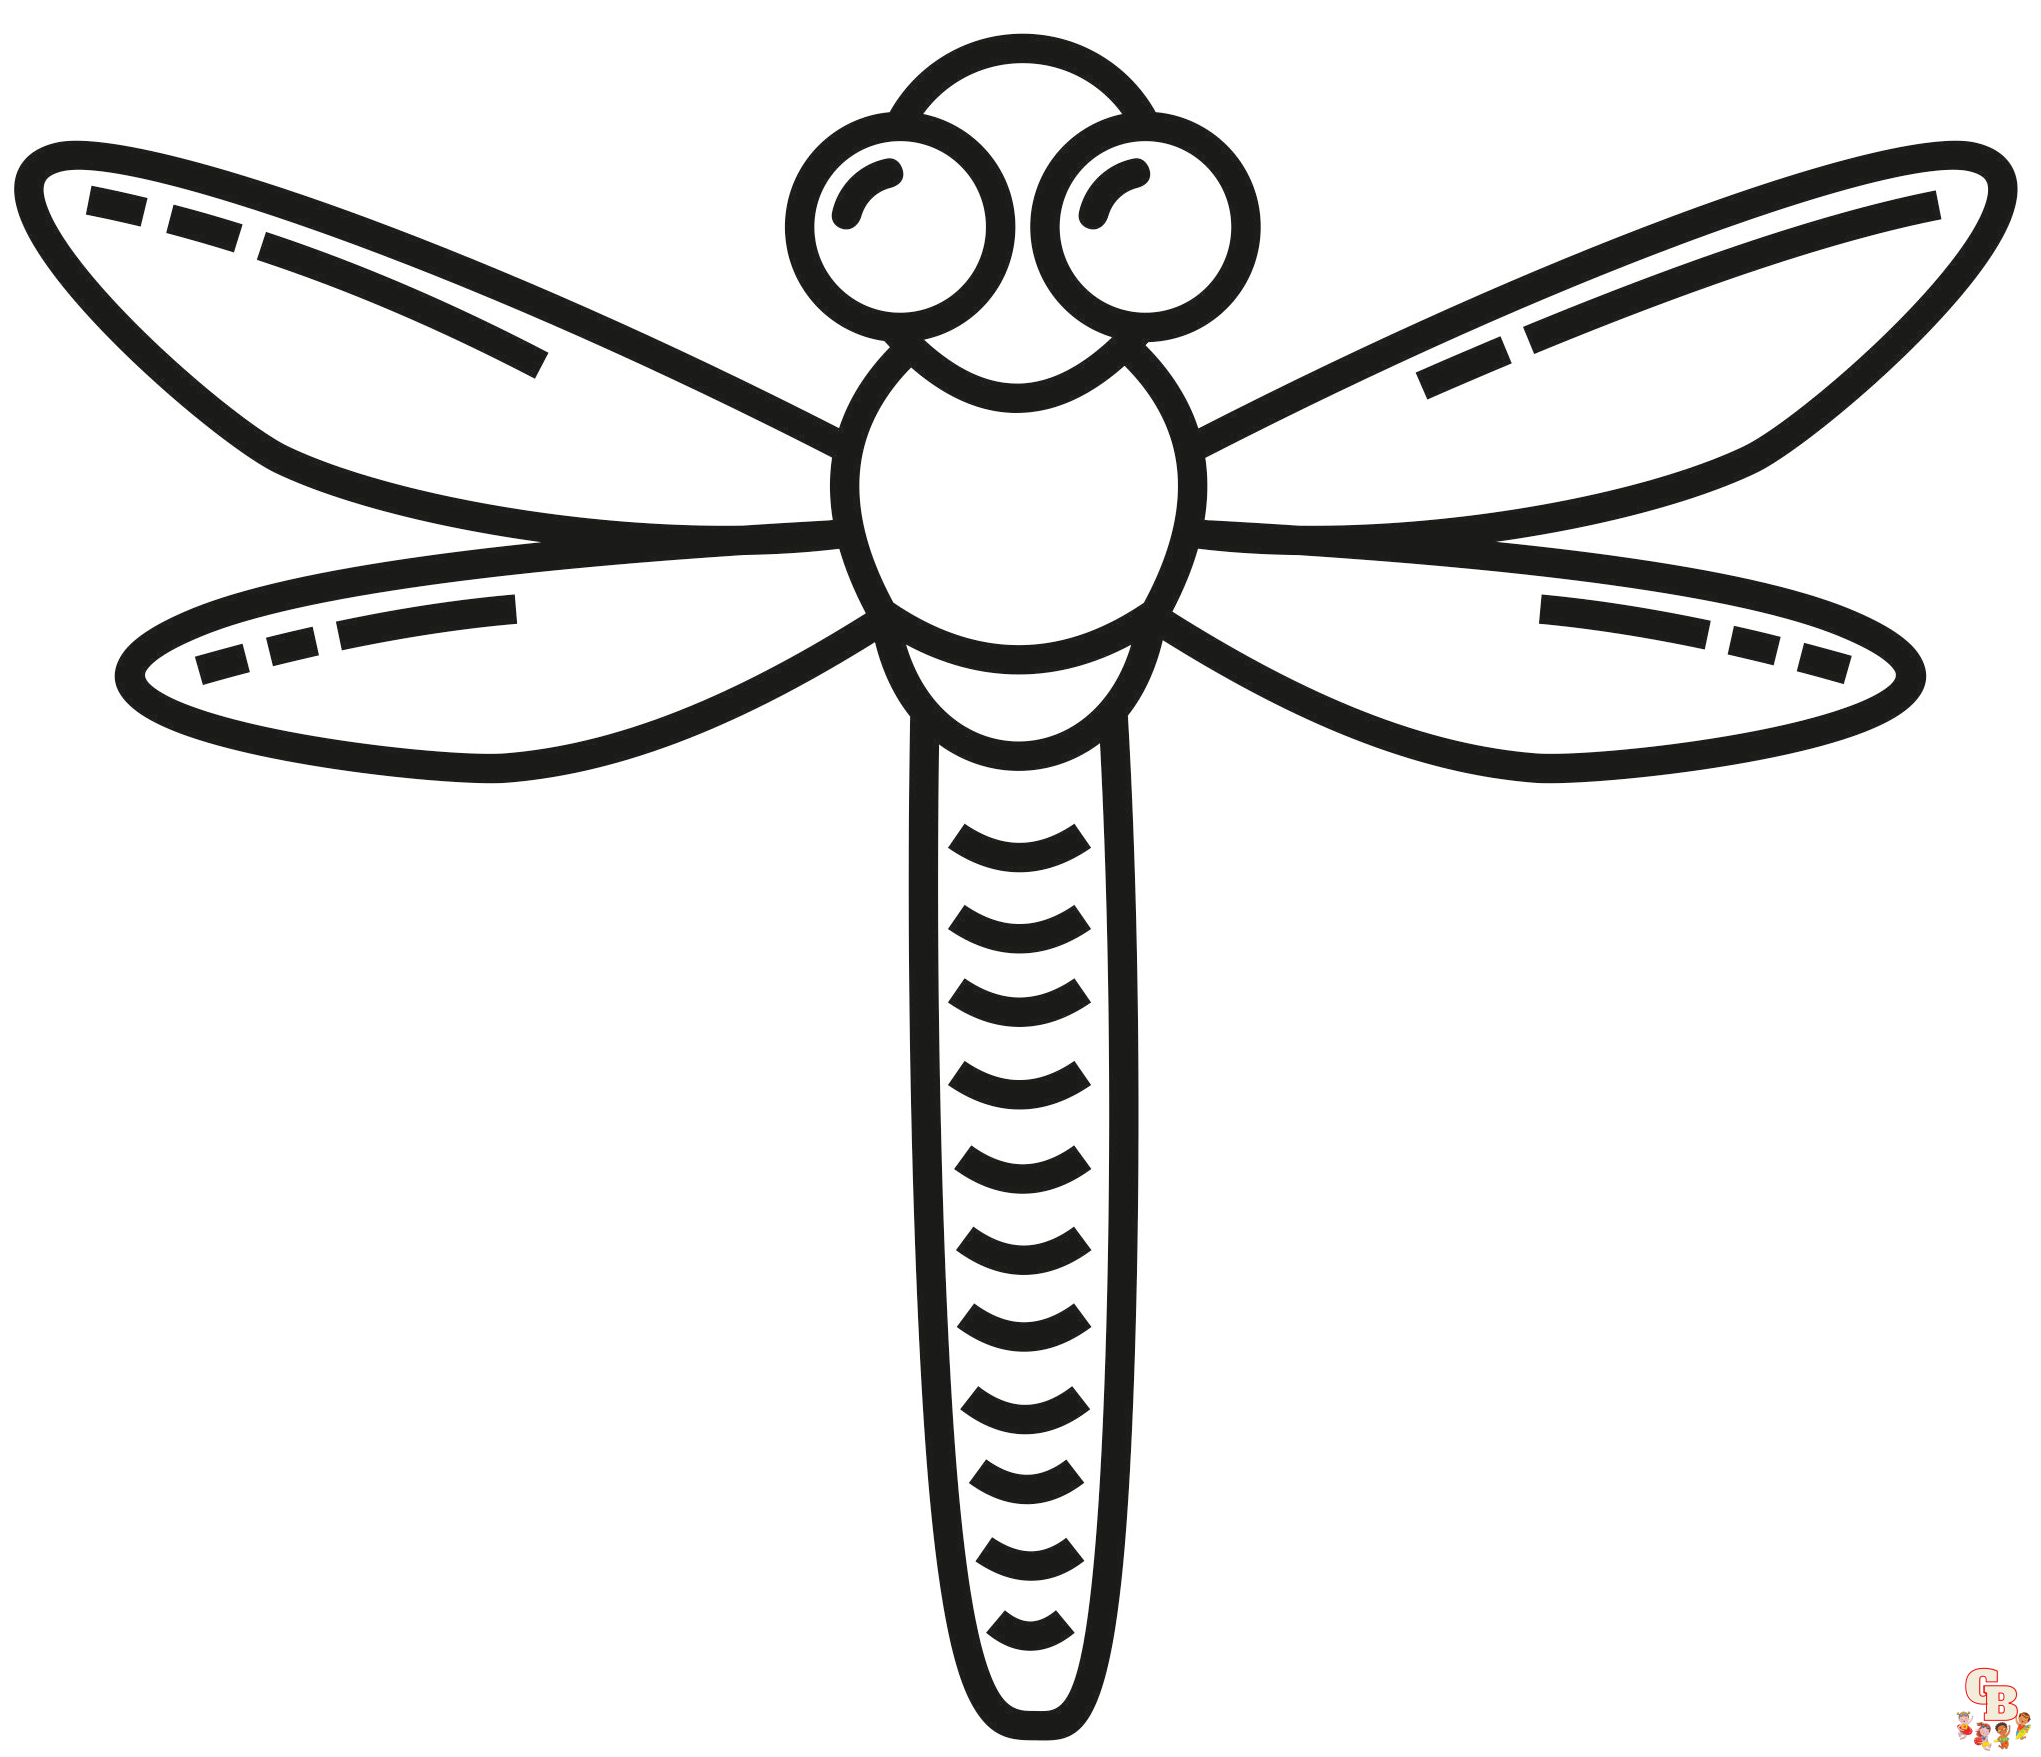 Dragonfly Coloring Pages 2